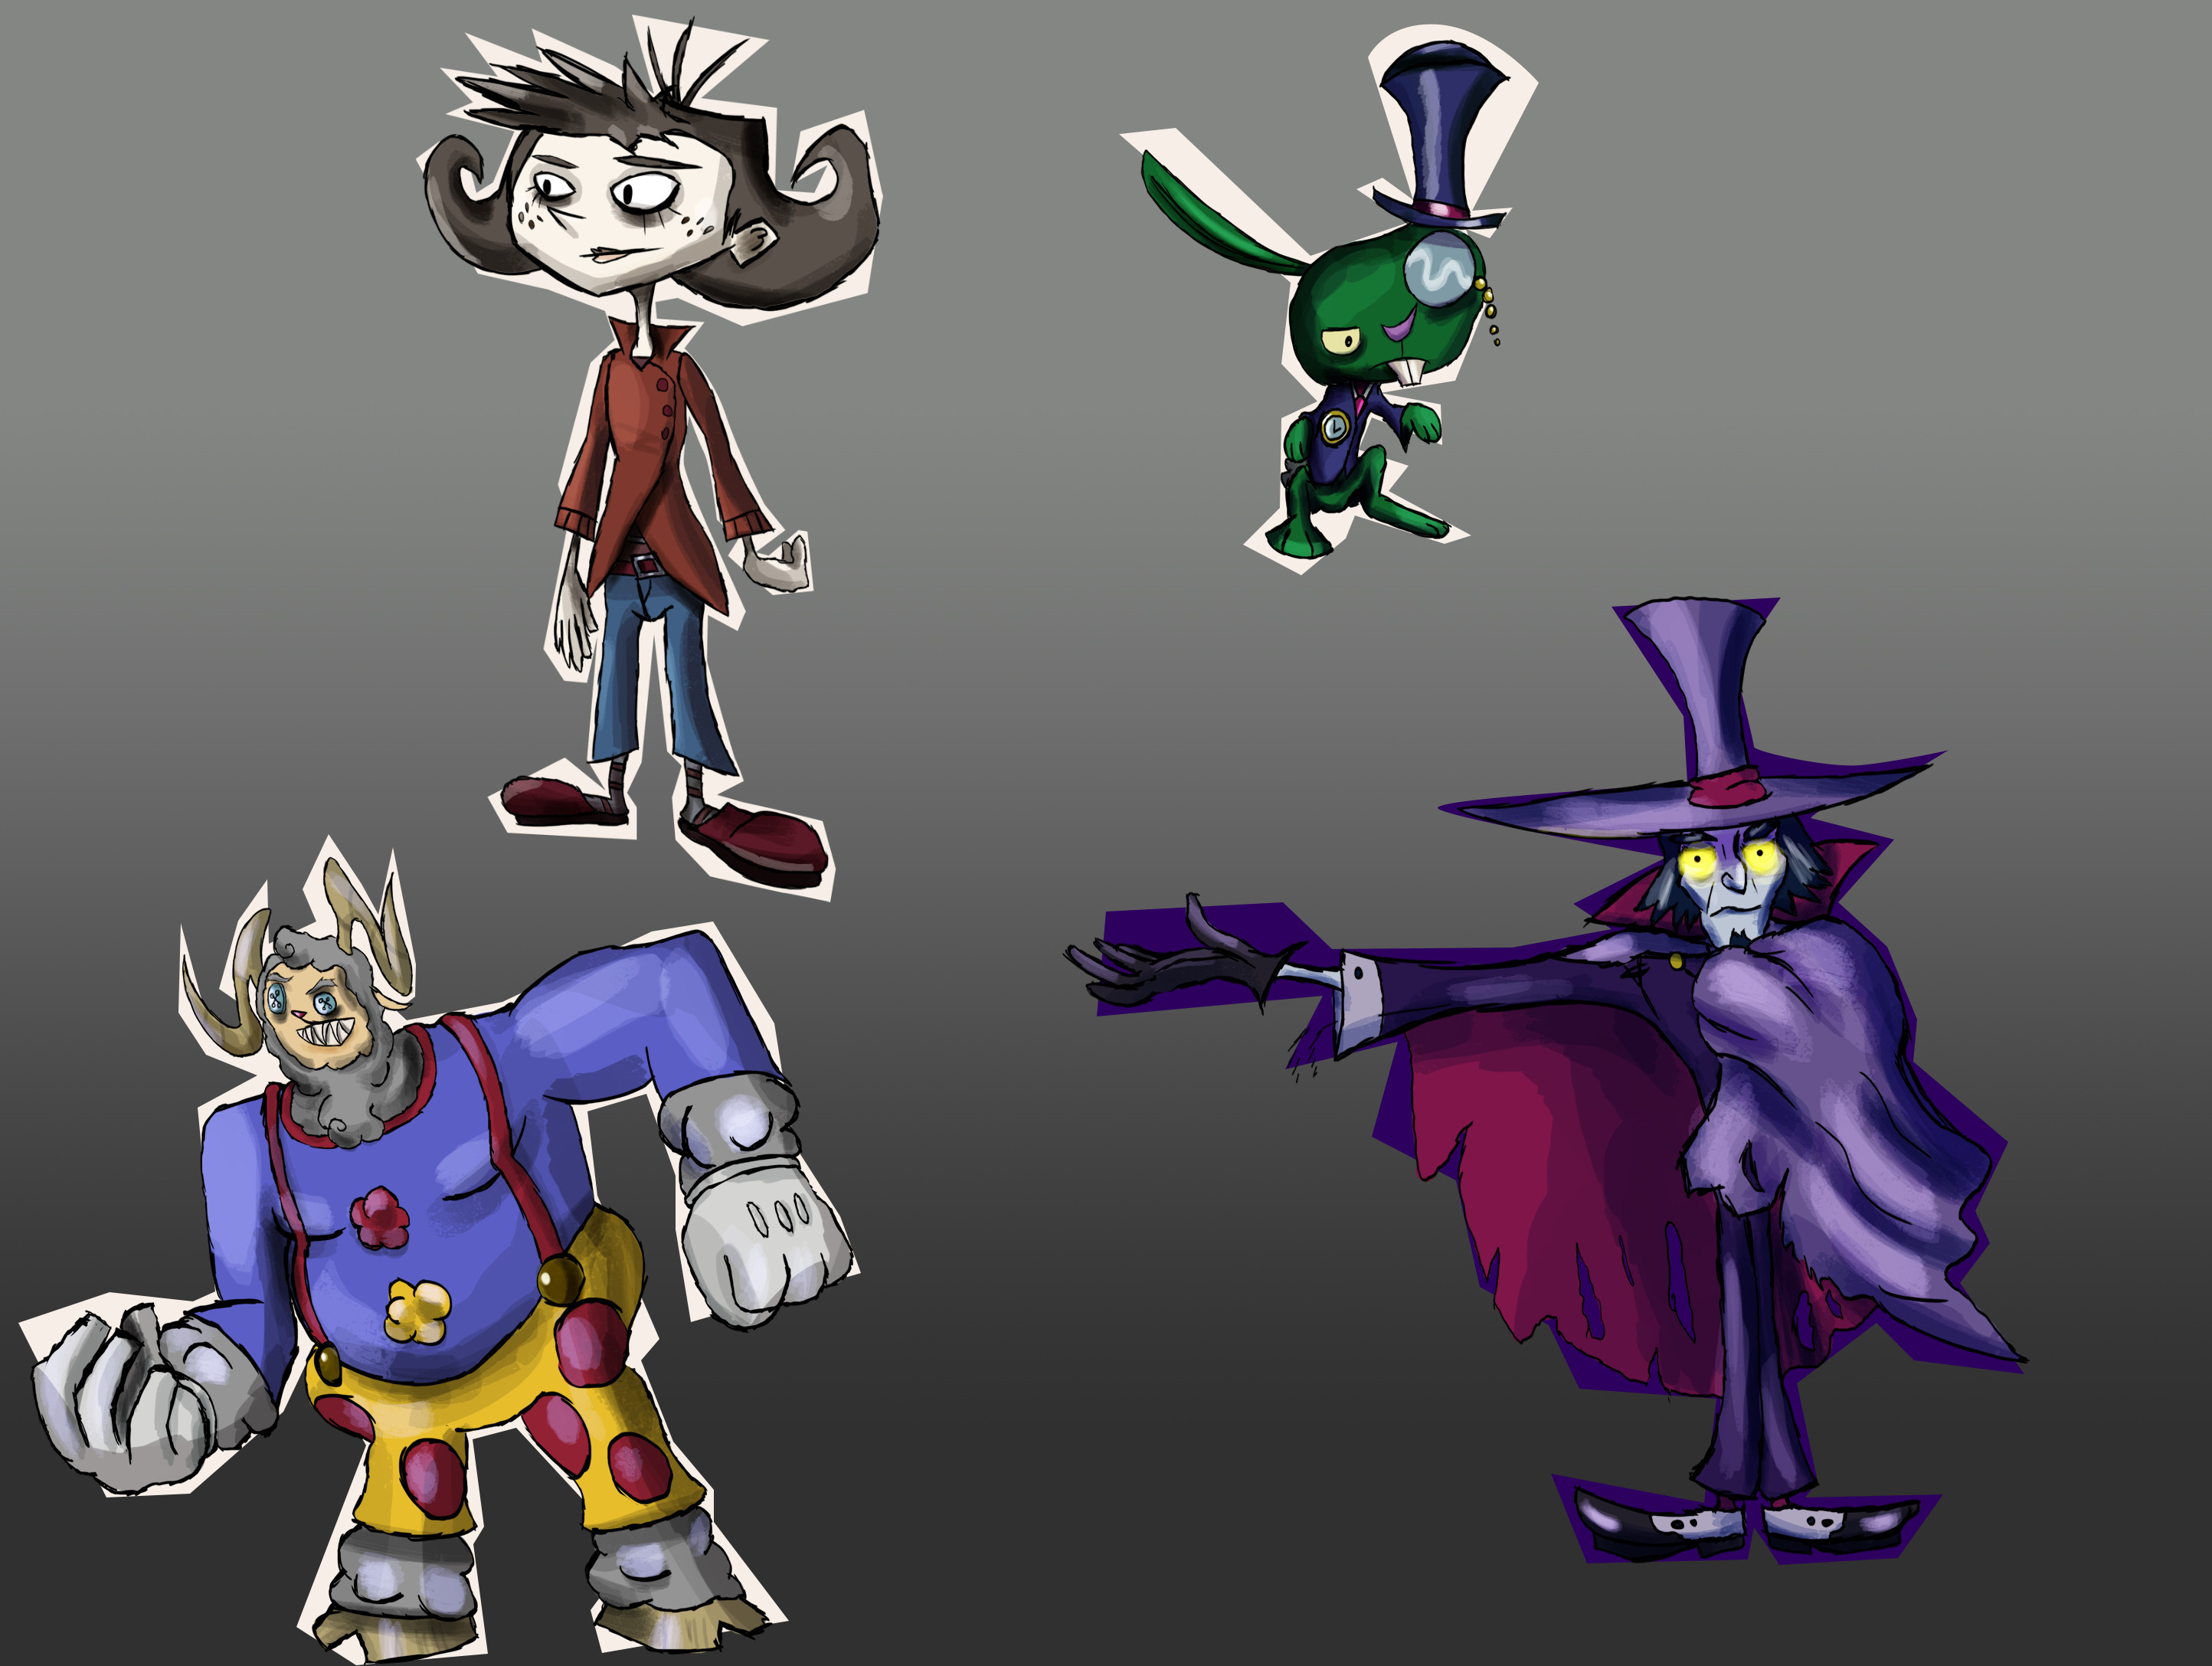 Oliva, the main protagonist, Greenie, Honks, who was going to be a boss, and Mr. Purple, the main villain.